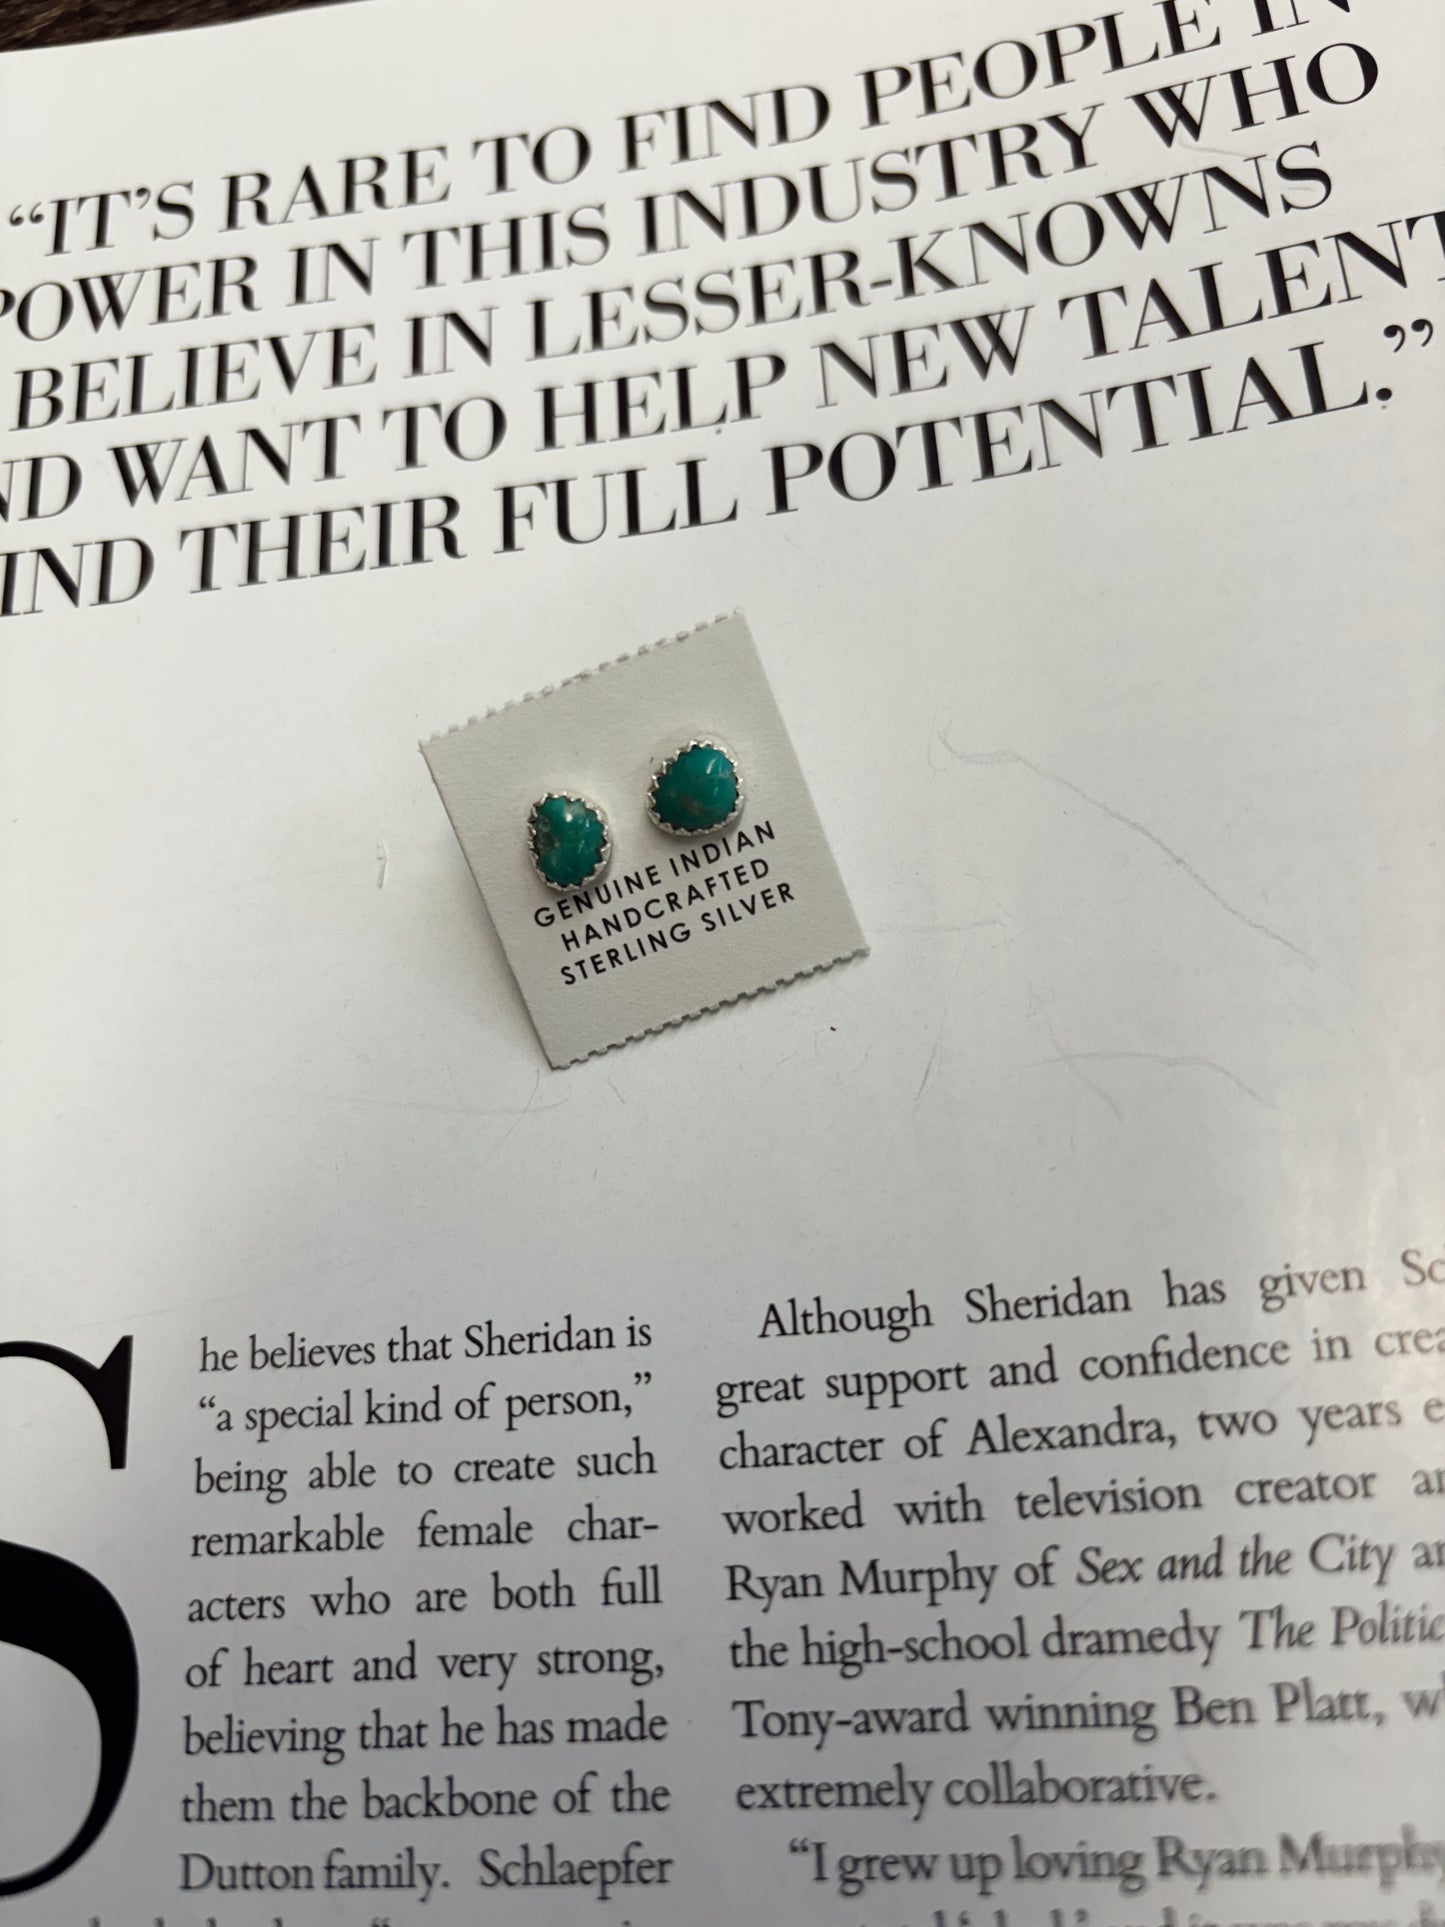 The Blakely Authentic Turquoise Studs